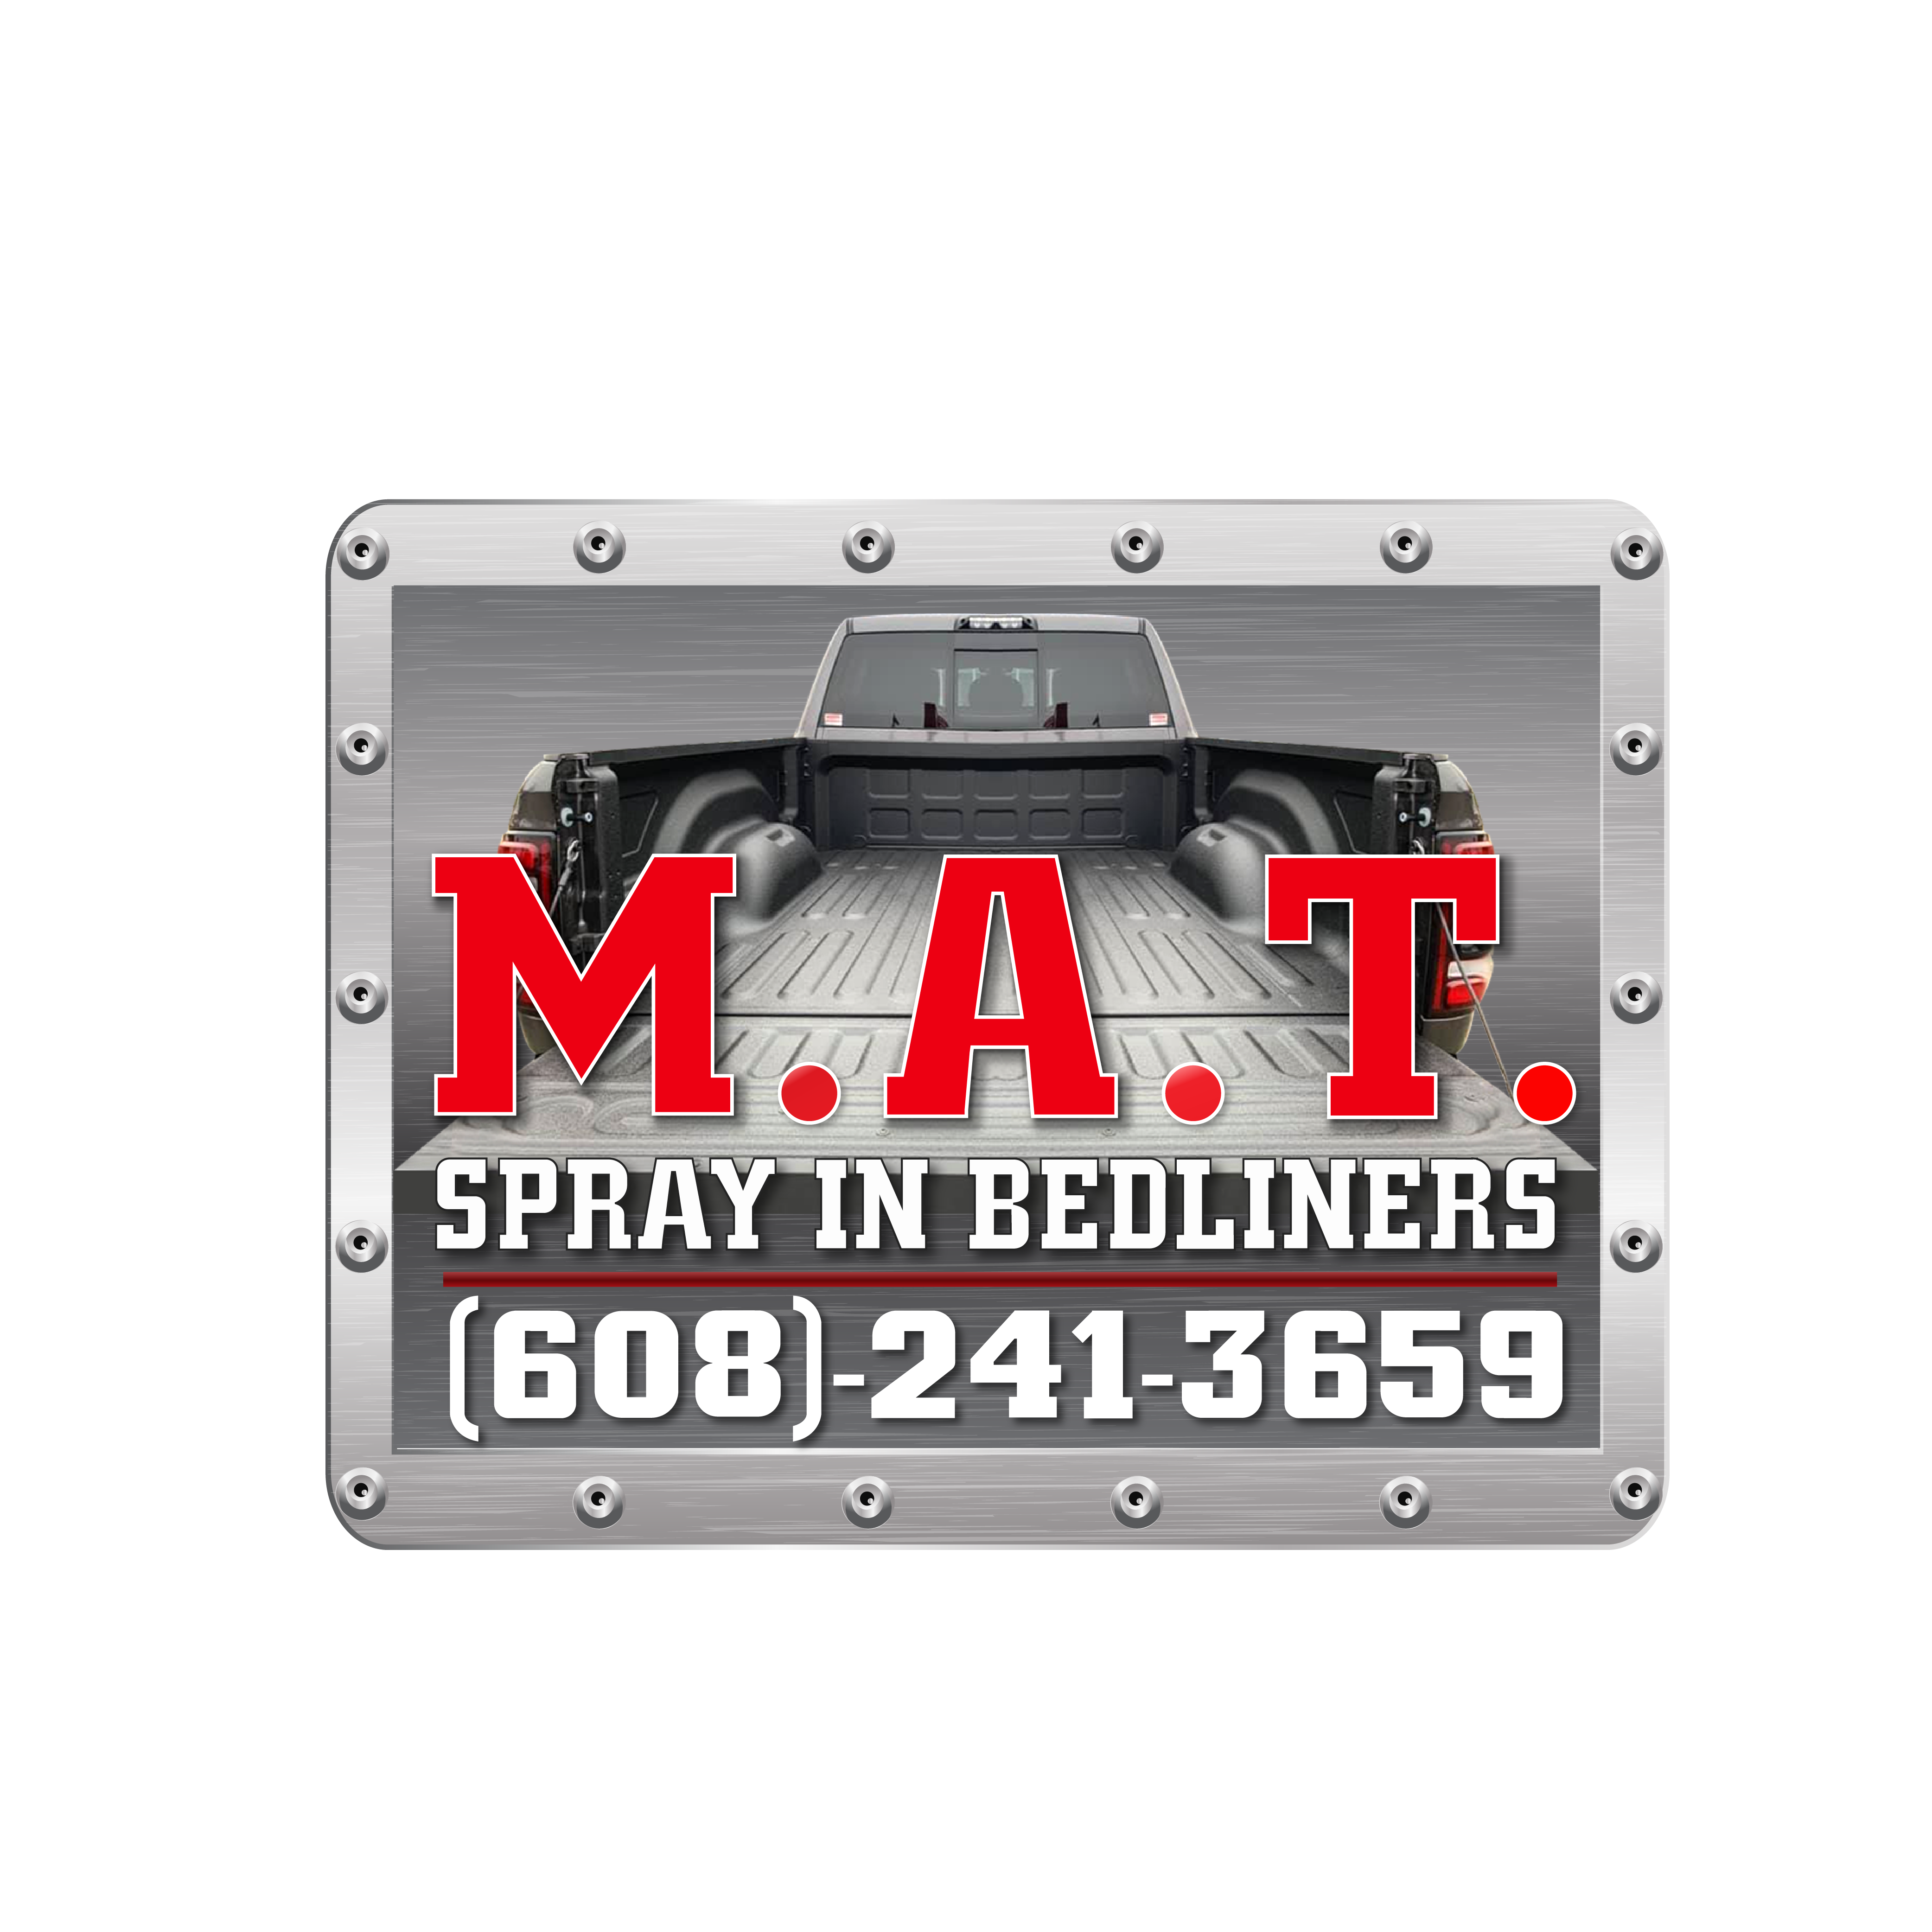 M.A.T. Spray on Bedliner - Truck Beds - Madison Auto Trim, Inc.